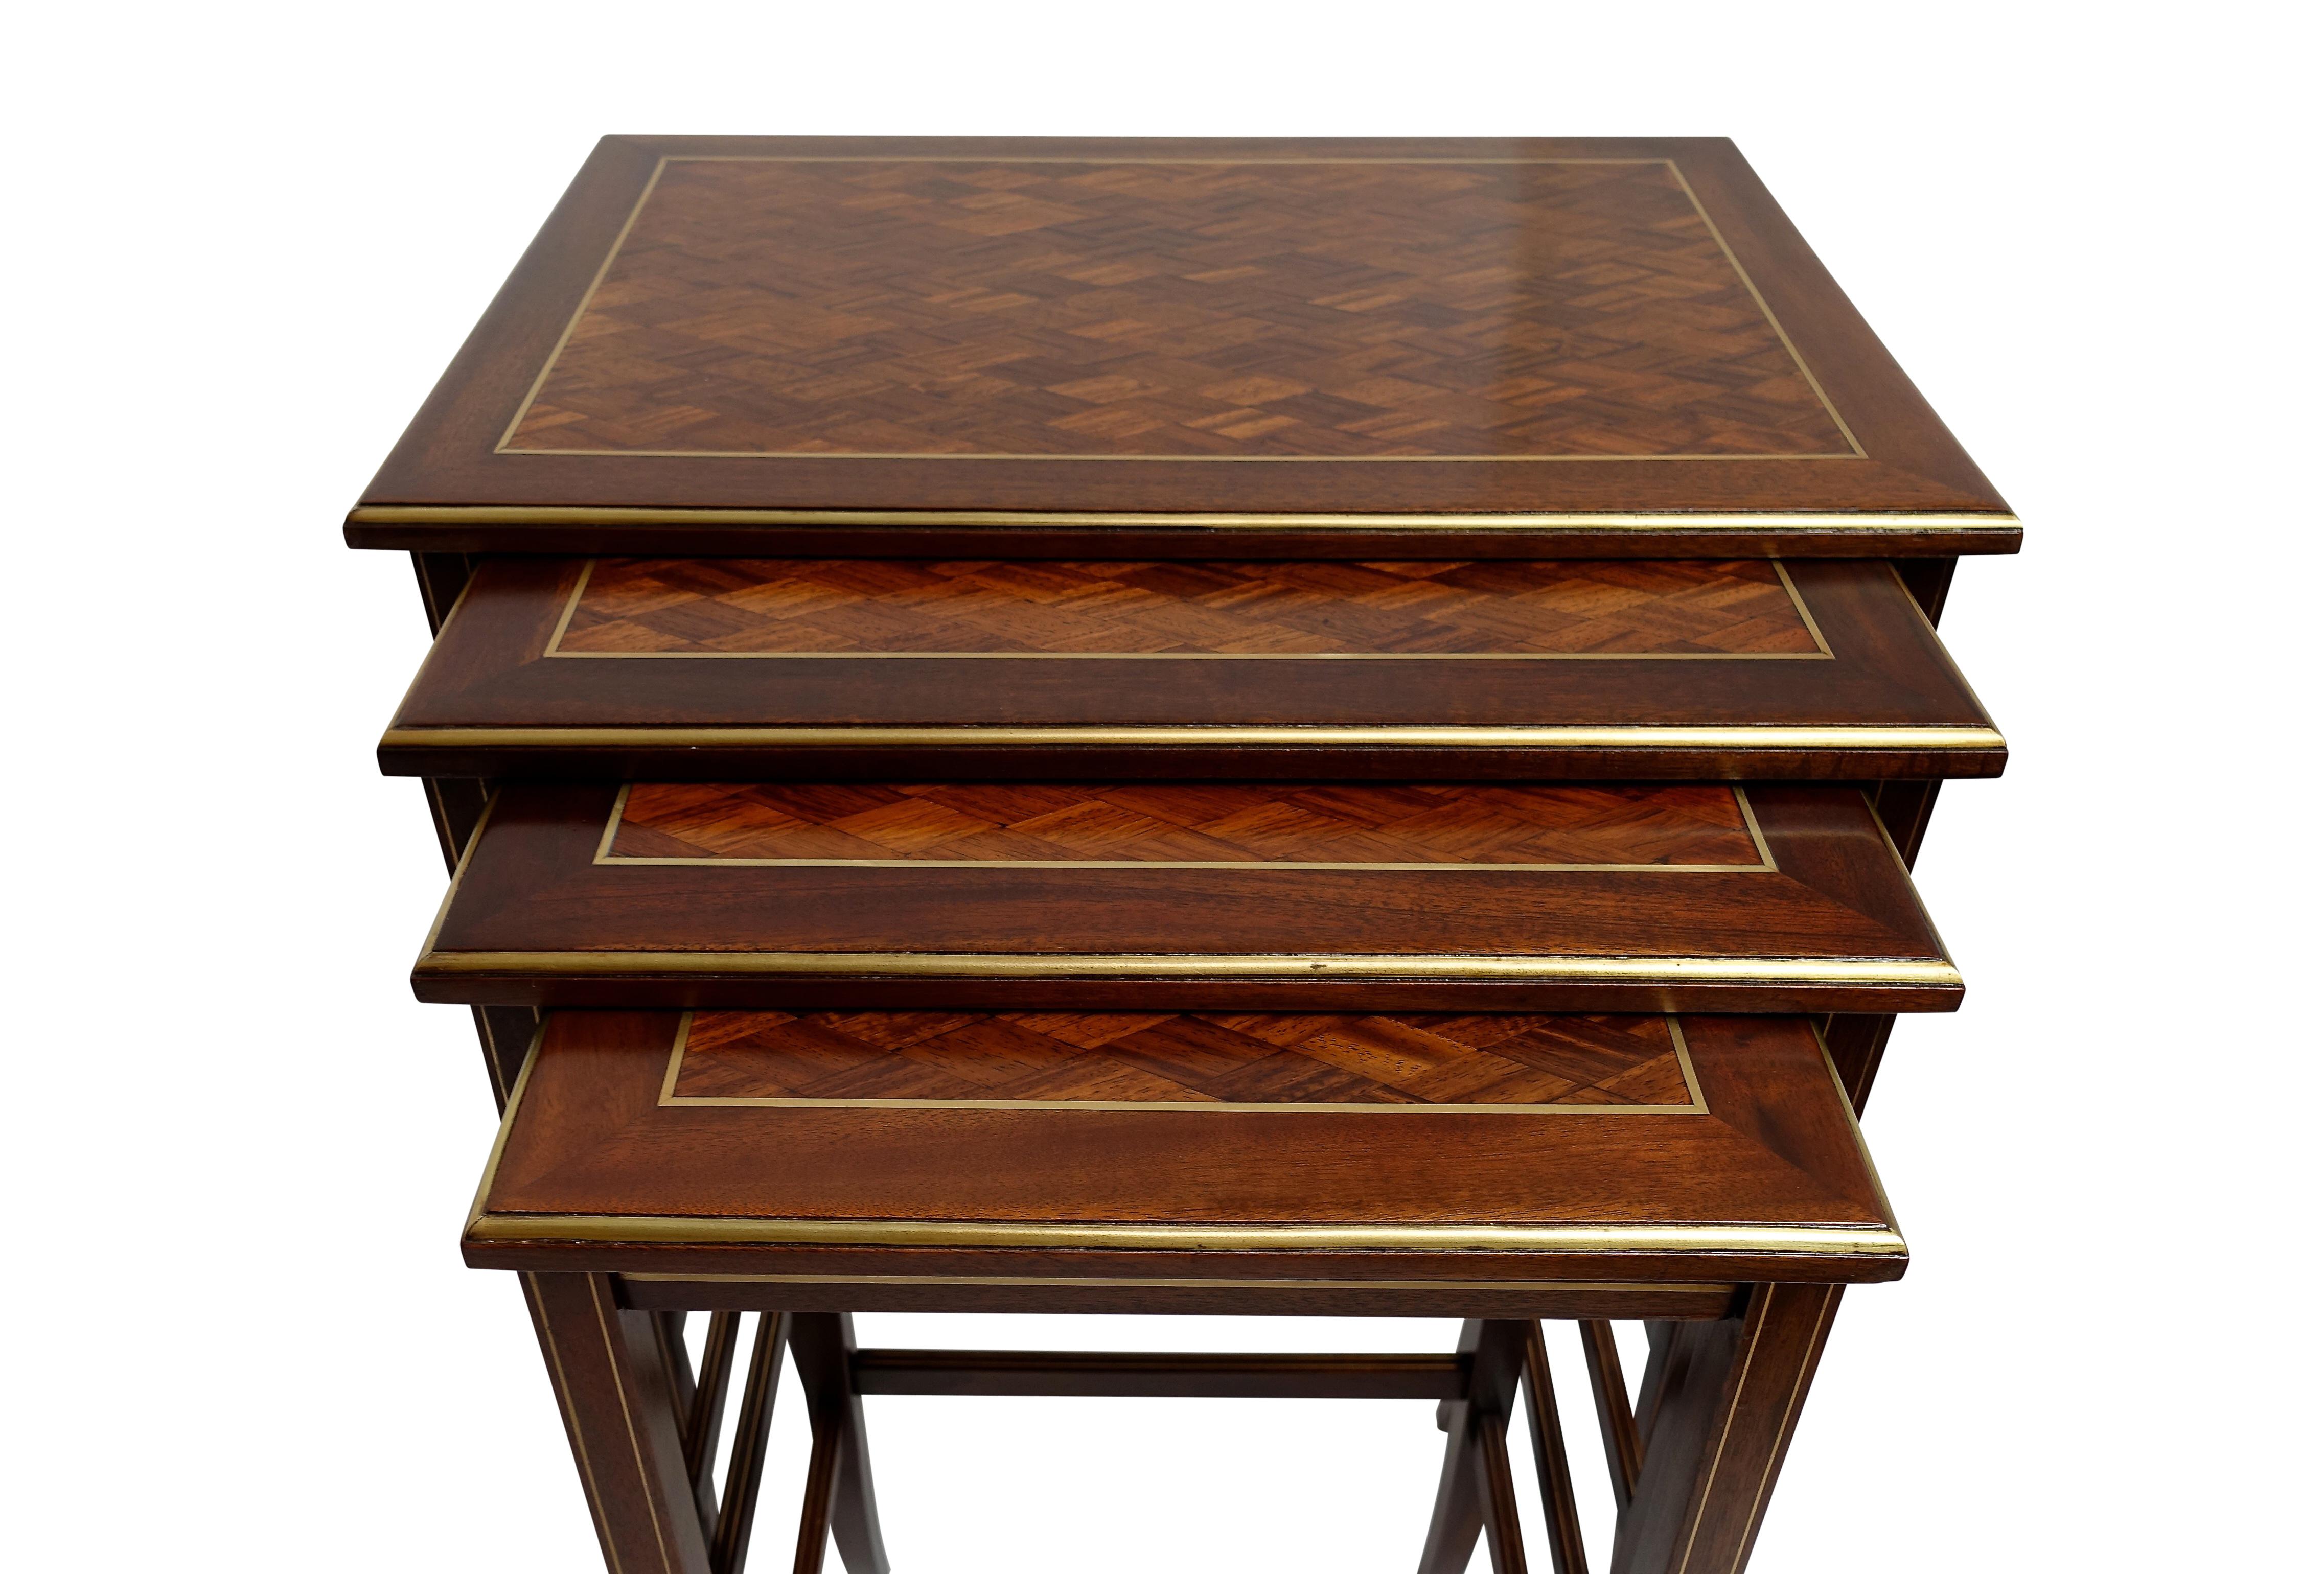 An attractive set of four mahogany nesting tables with a parquetry tumbling block pattern on the top surface, and having brass inlay around the top, on the legs and the stretcher bar, American, mid-20th century.